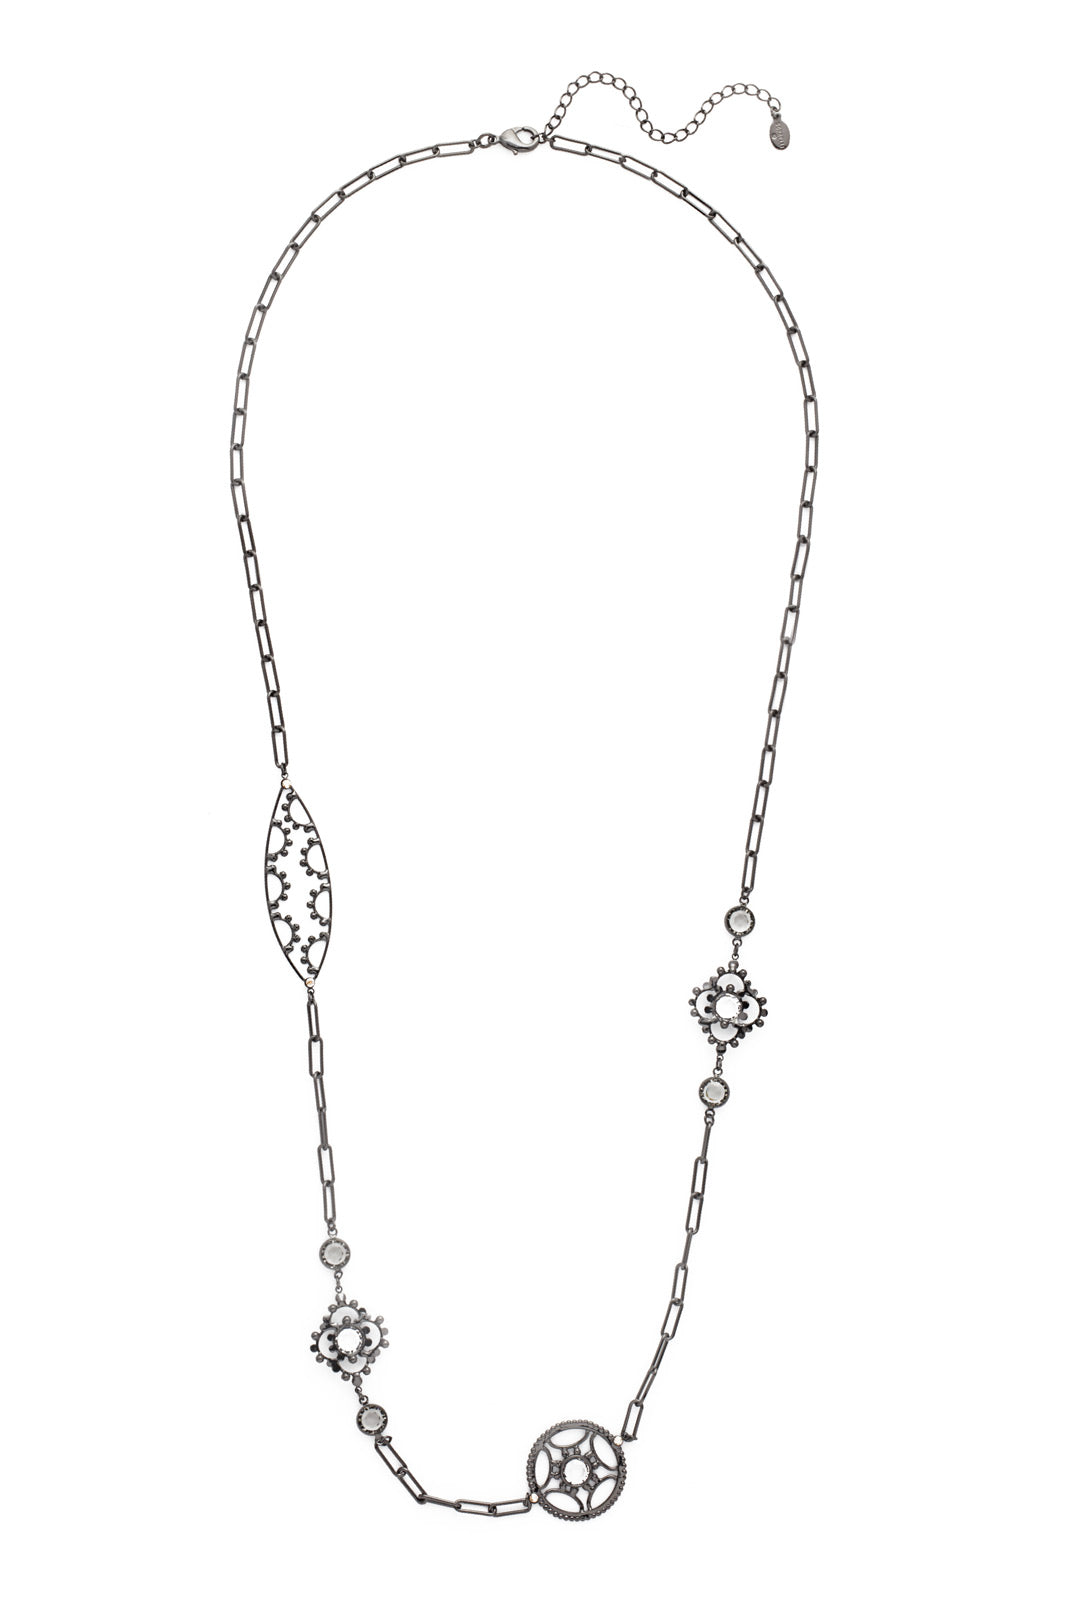 Everly Long Necklace - NES6GMGNS - The Everly Long Necklace is a great layering piece that's unlike any other in your jewelry collection with its unique hand-soldered metalwork and clear, sparkling gems. From Sorrelli's Golden Shadow collection in our Gun Metal finish.